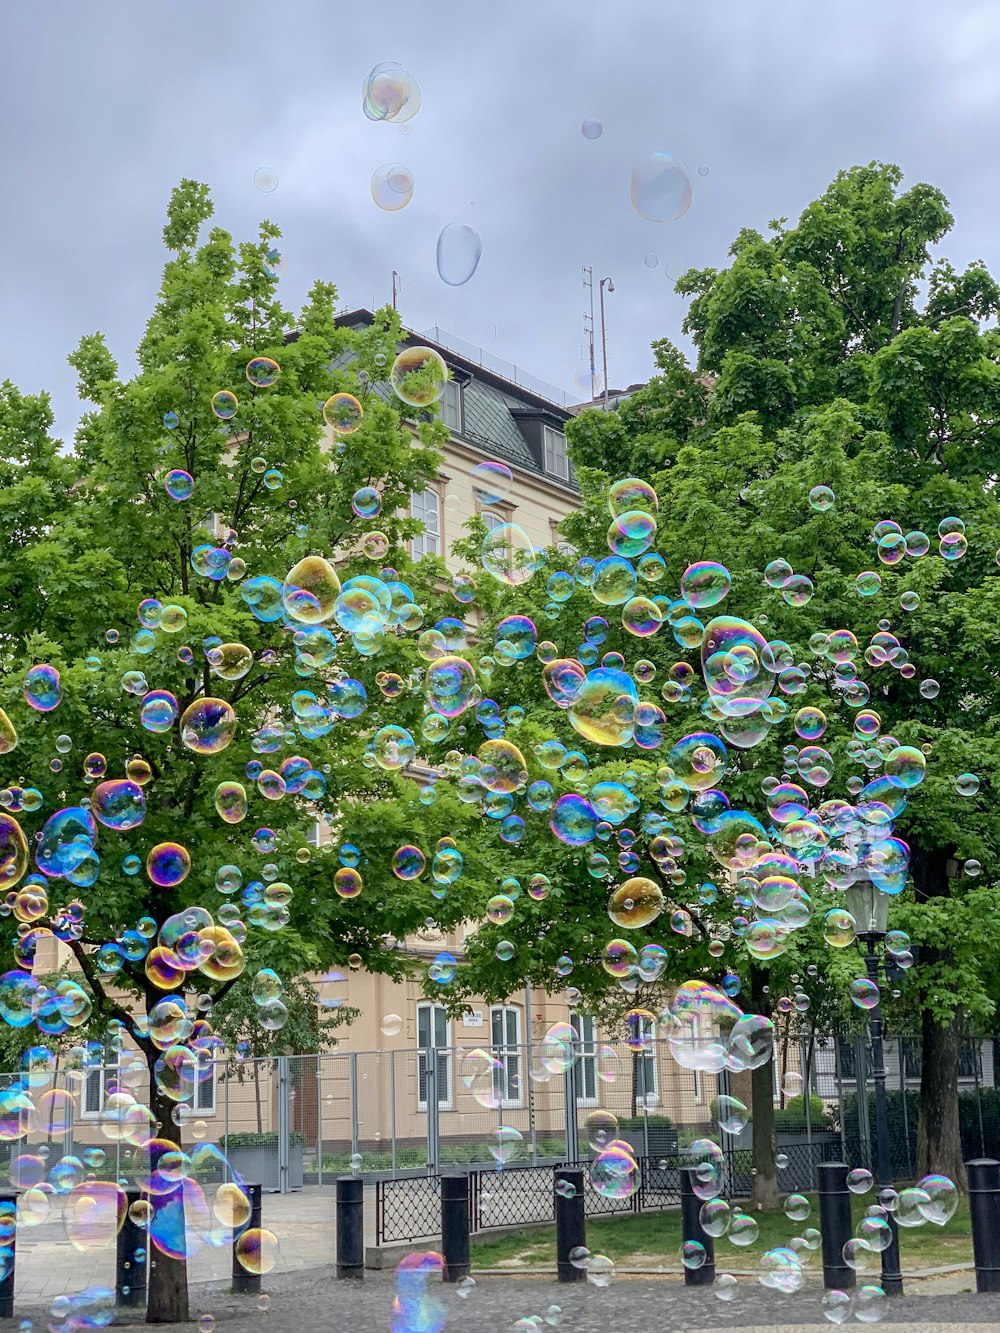 bubbles flying during daytime